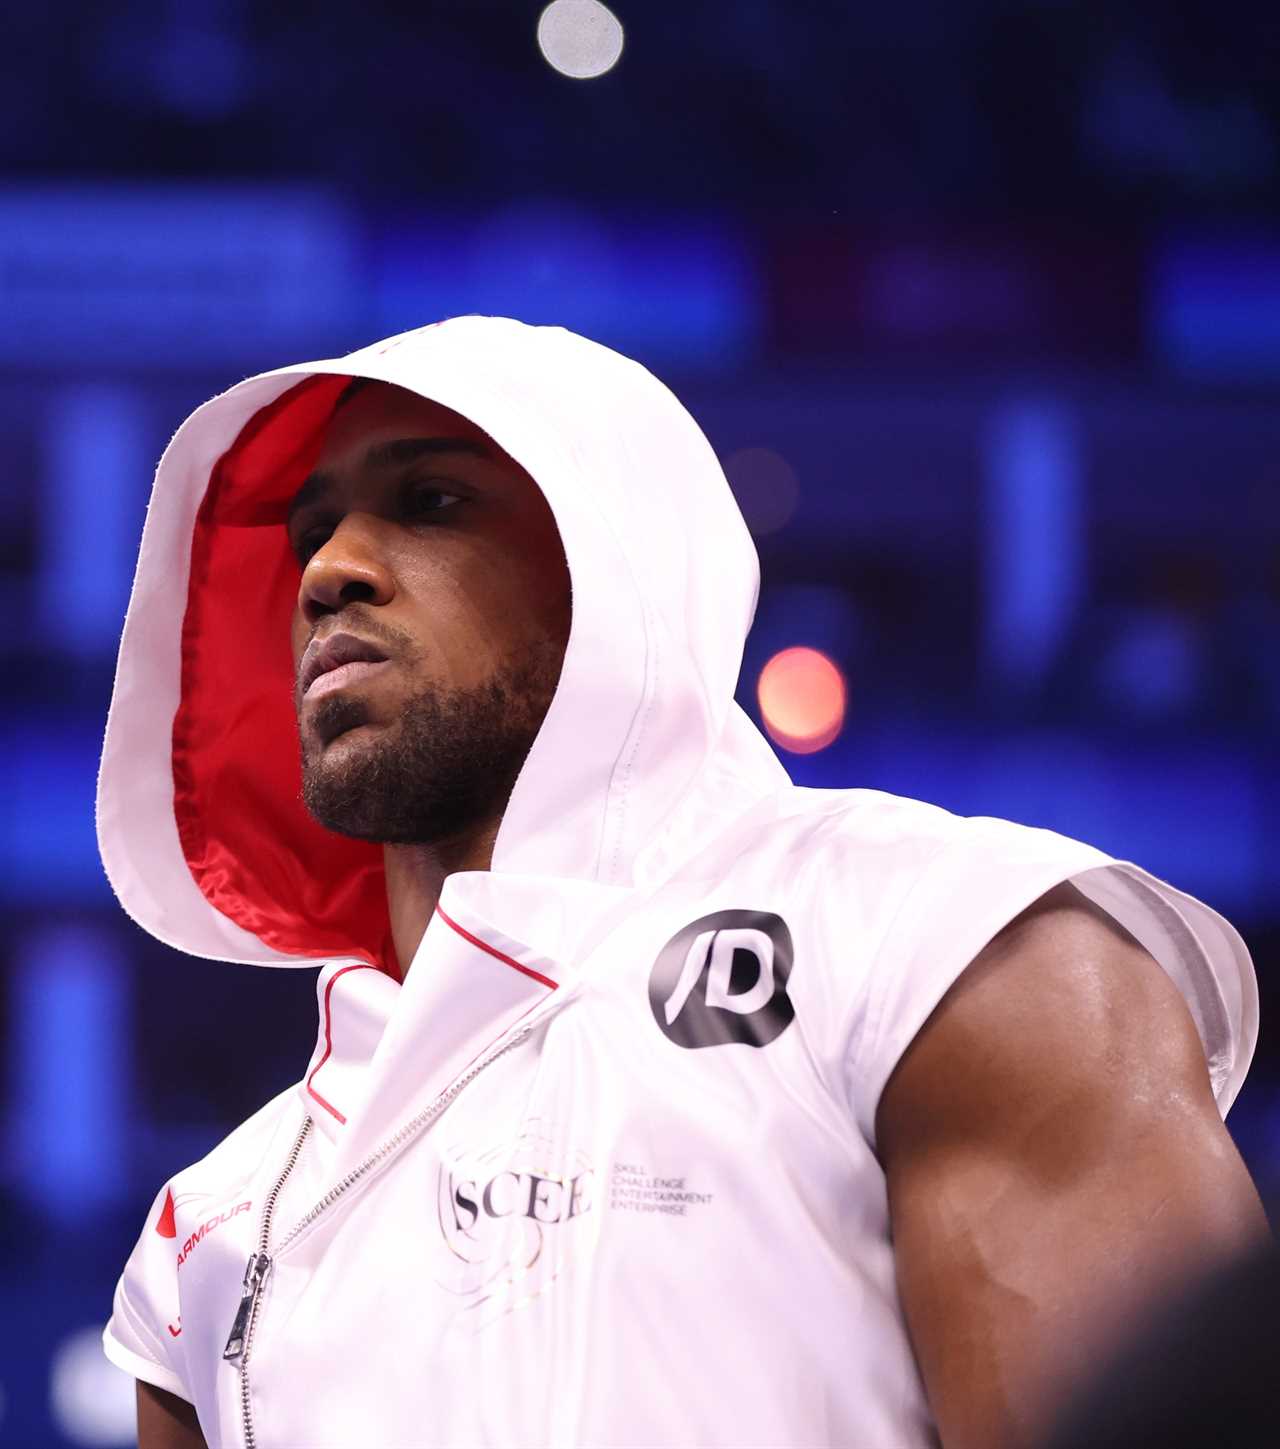 Eddie Hearn reveals the final hurdle that must be cleared before Anthony Joshua and Deontay wilder can be officially announced